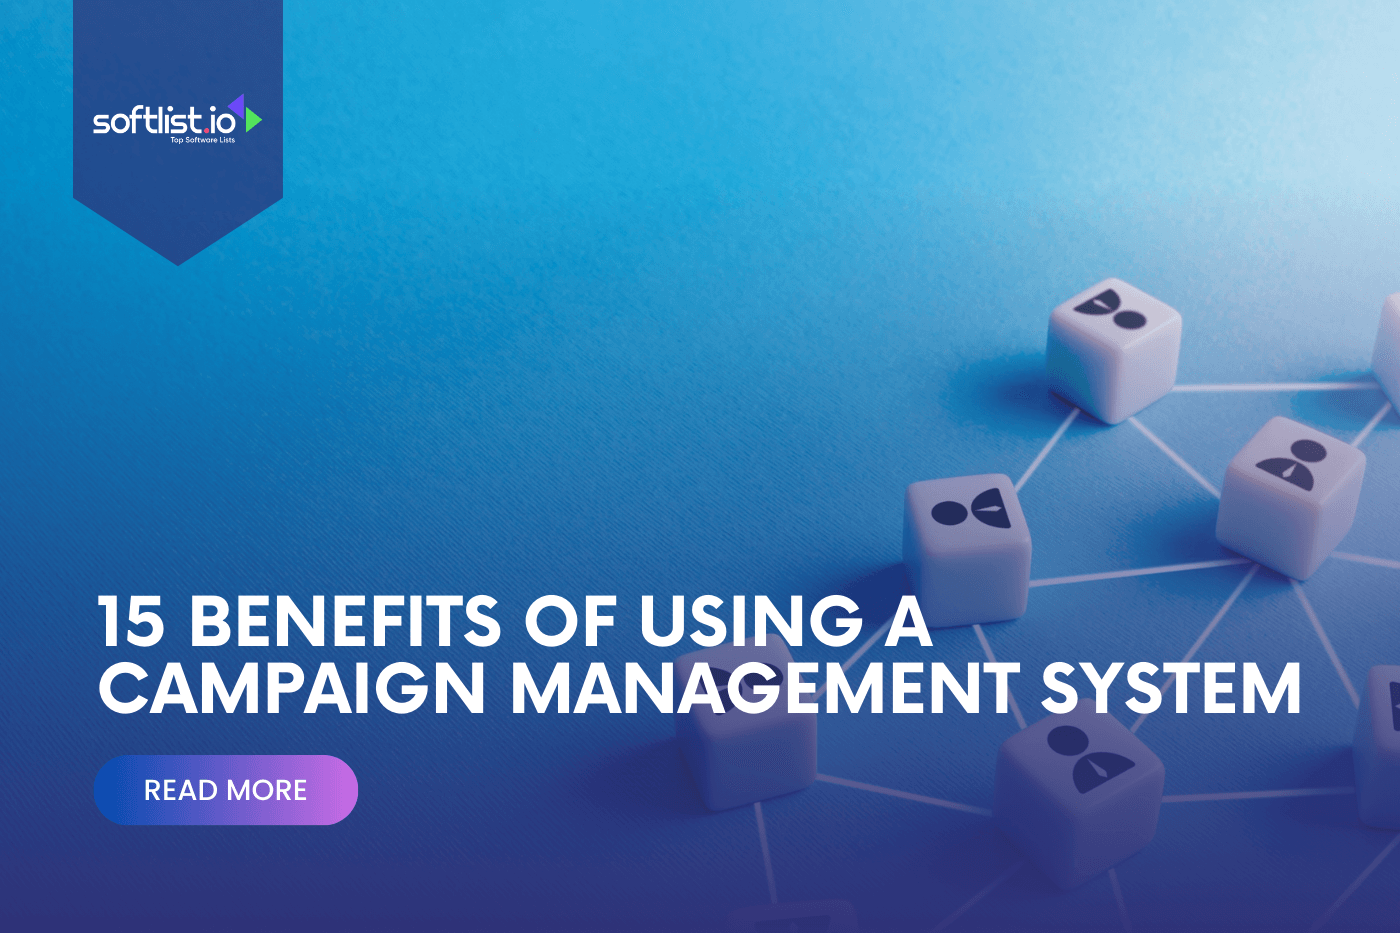 15 Benefits of Using a Campaign Management System